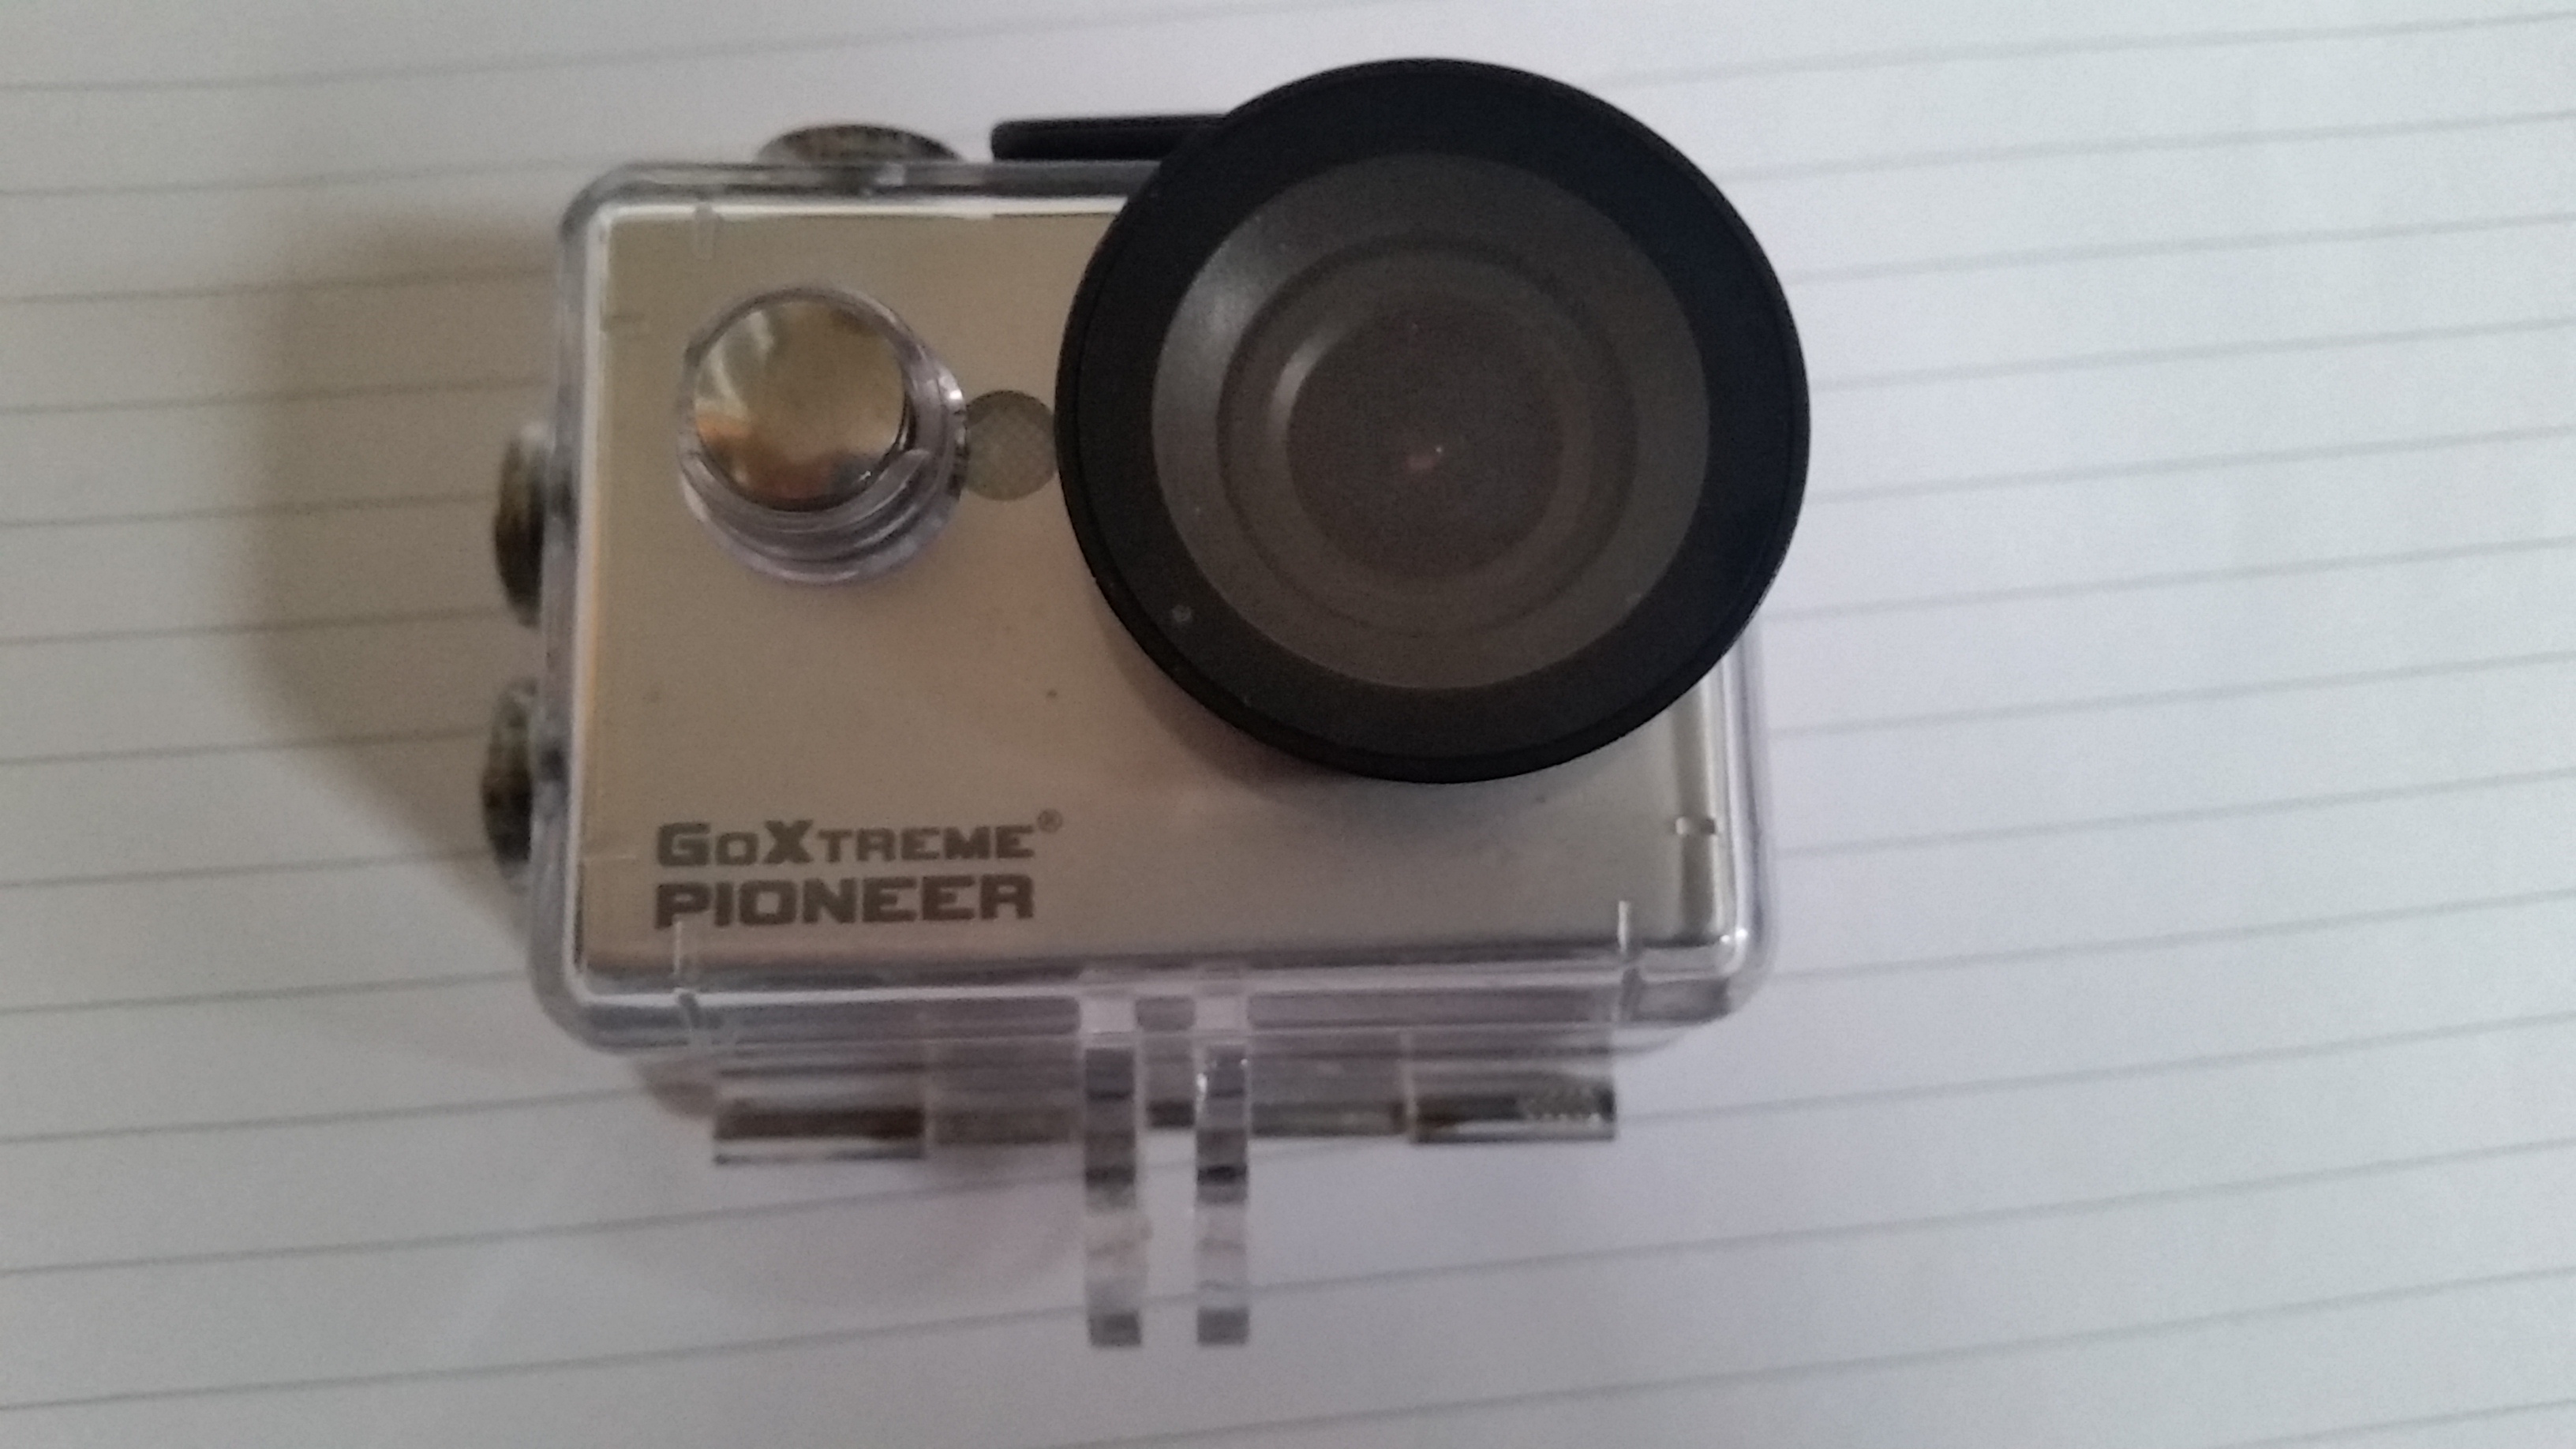 GoXtreme Pioneer GoPro camera general view with waterproof housing